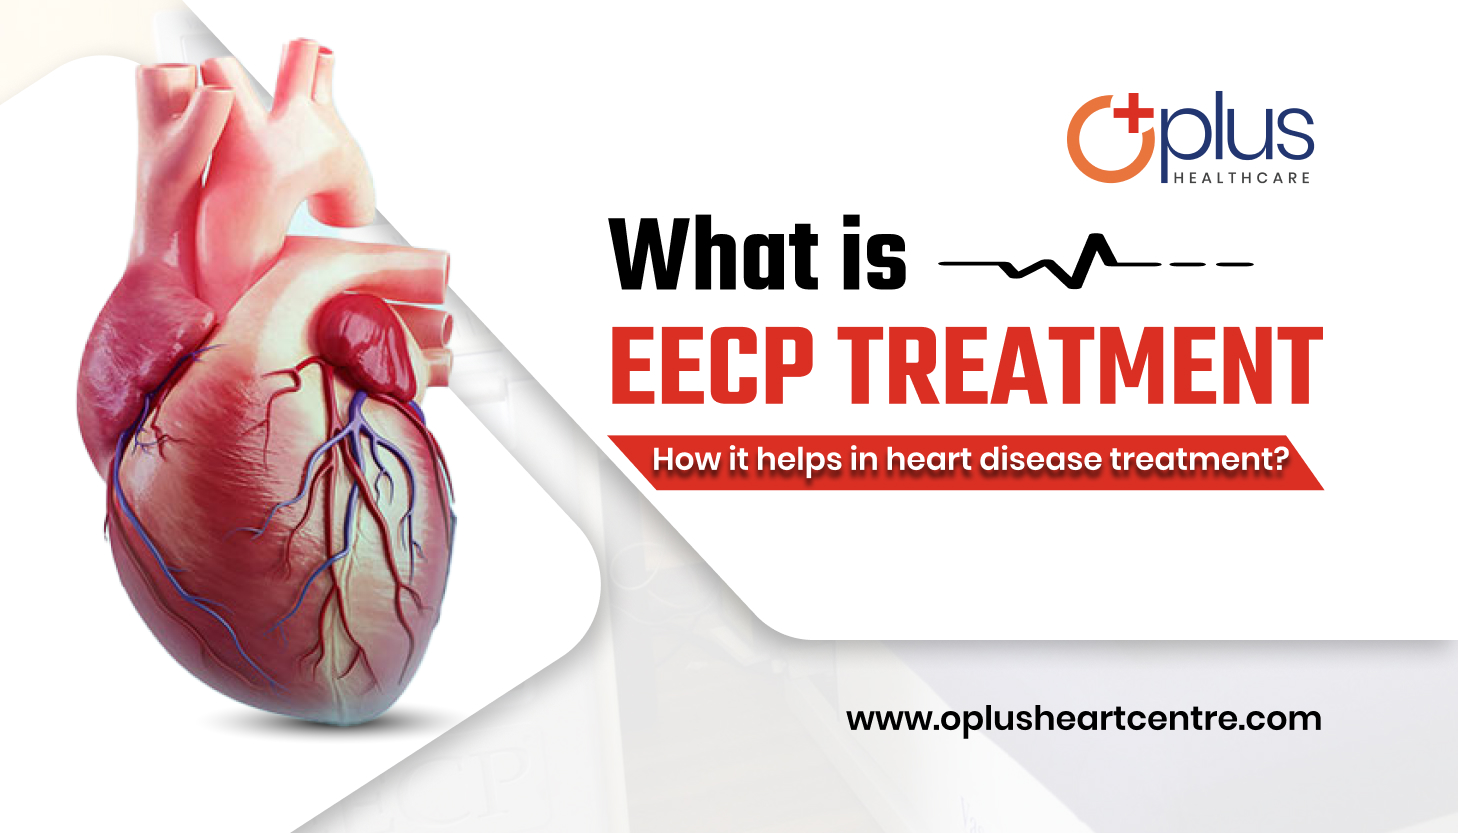 What is EECP treatment, how it helps in heart disease treatment?